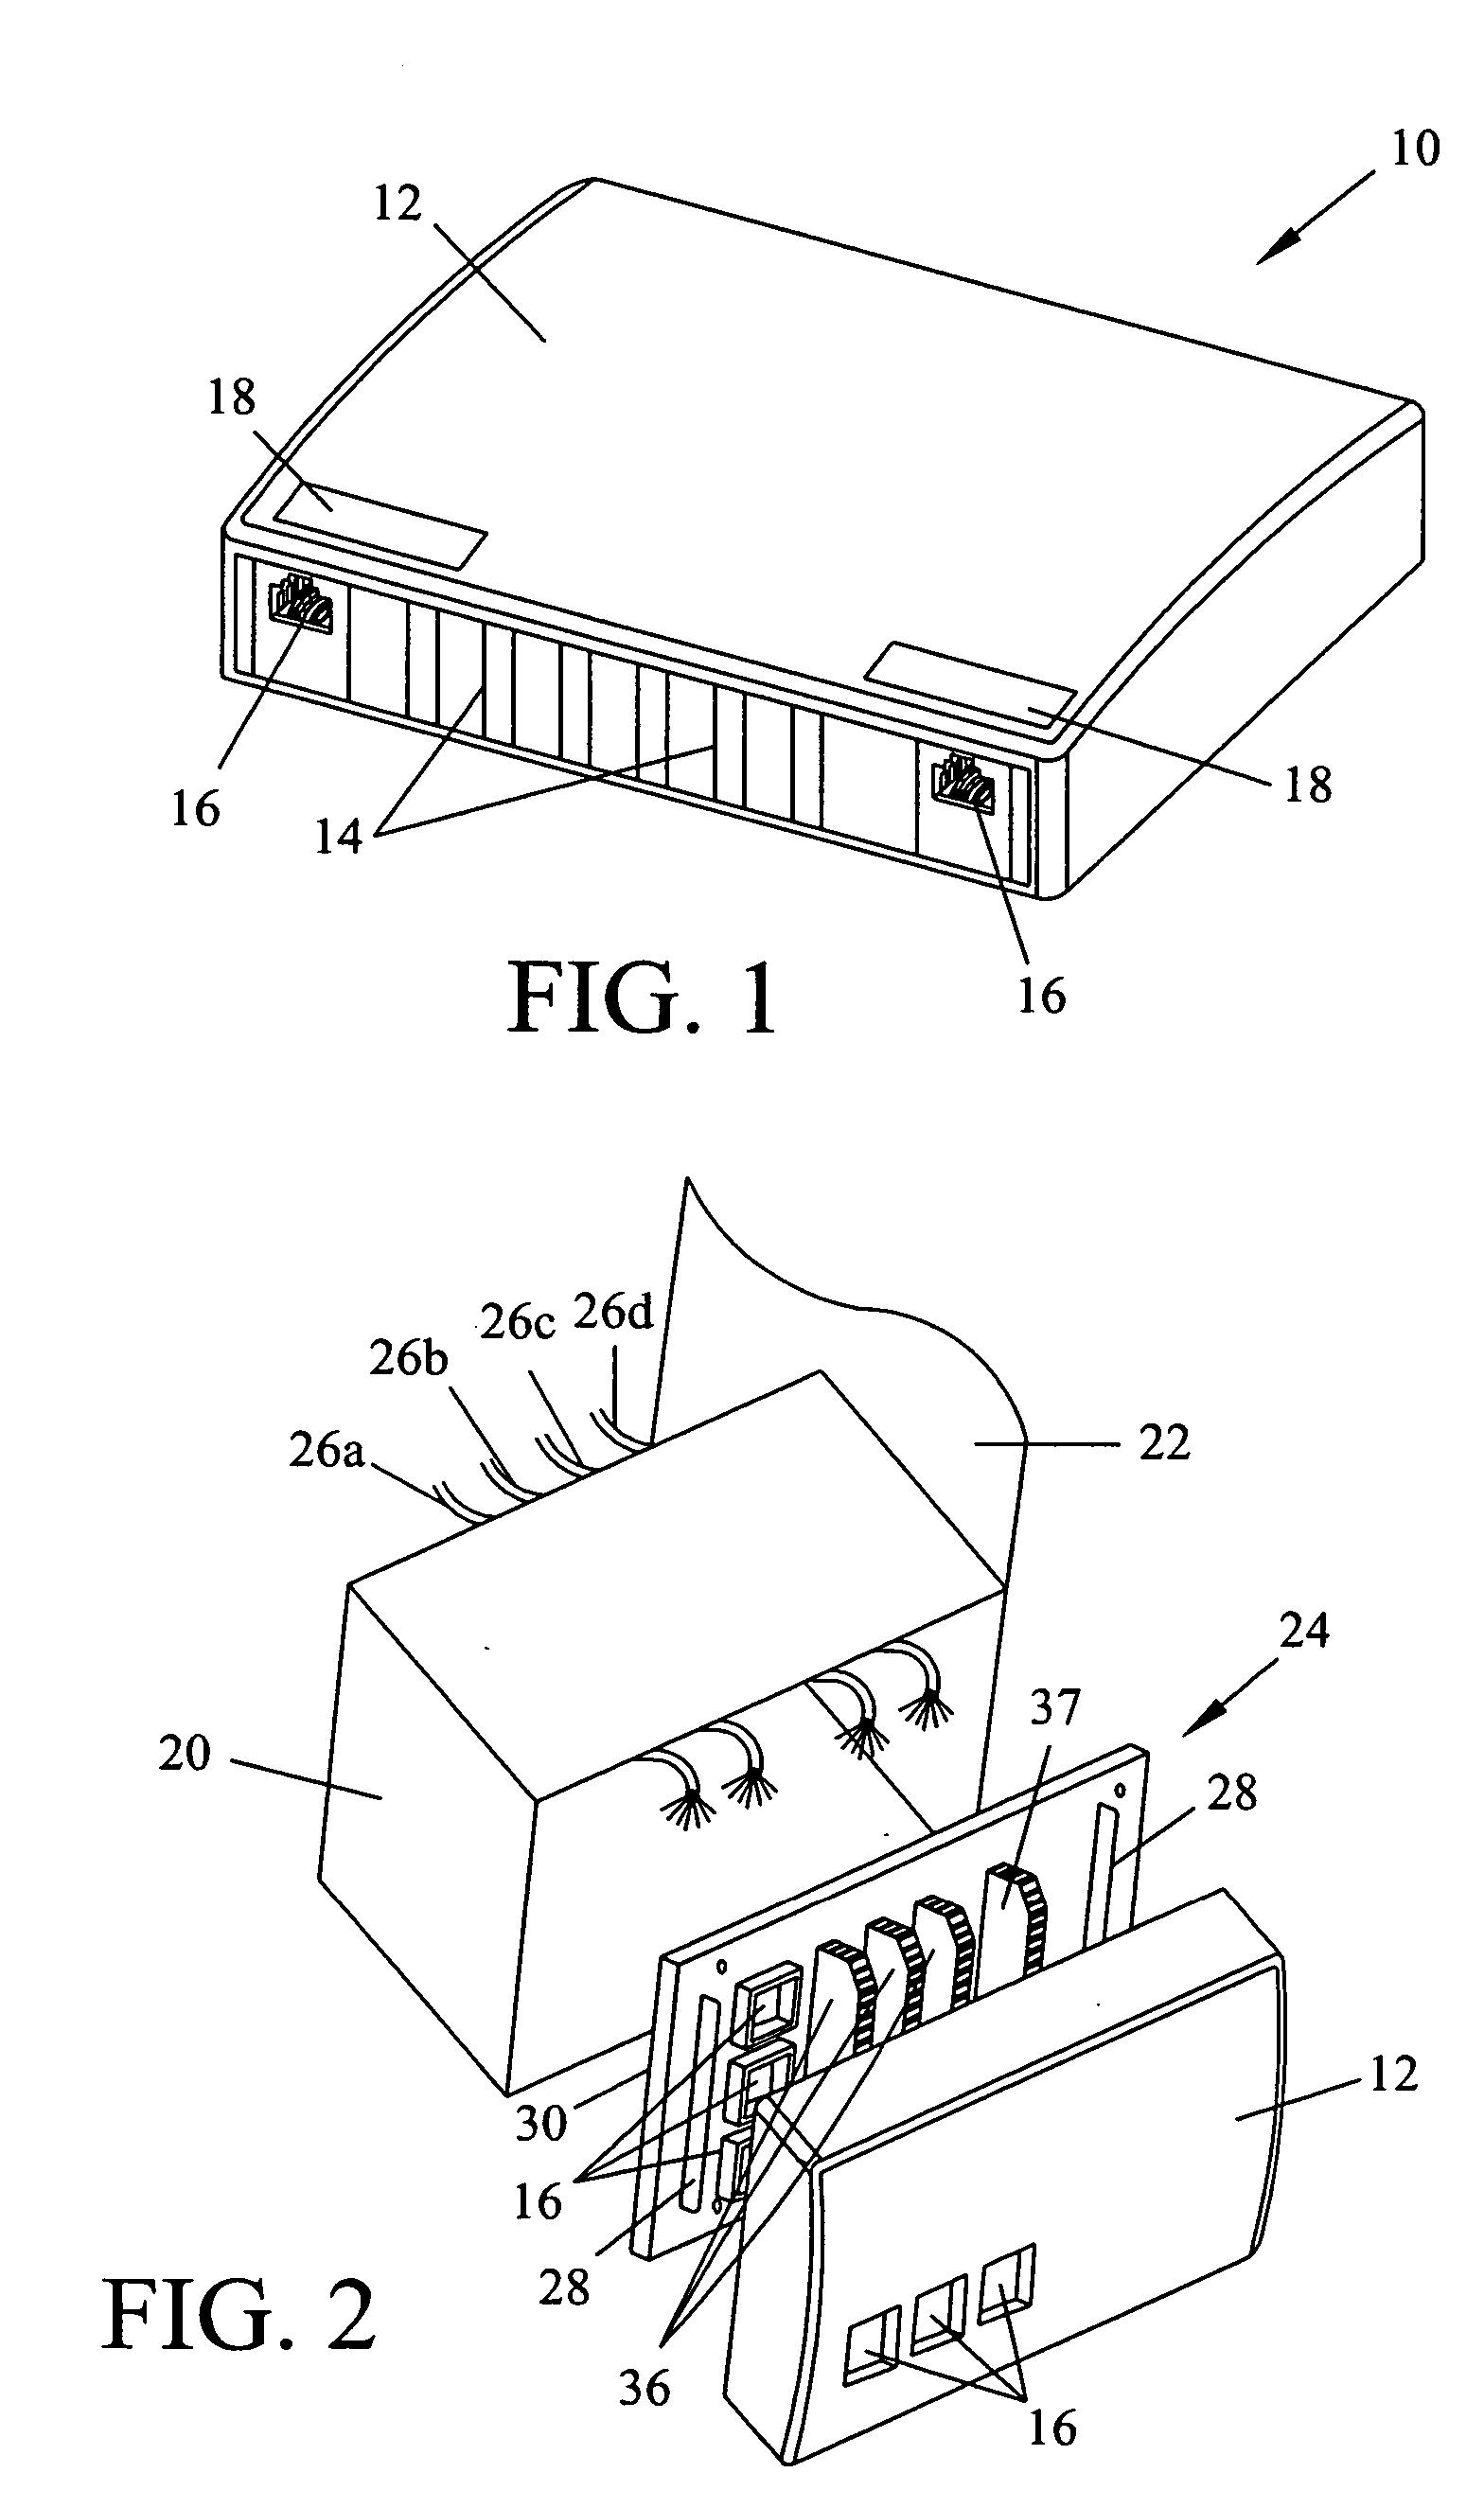 Wi-Fi access point device and system